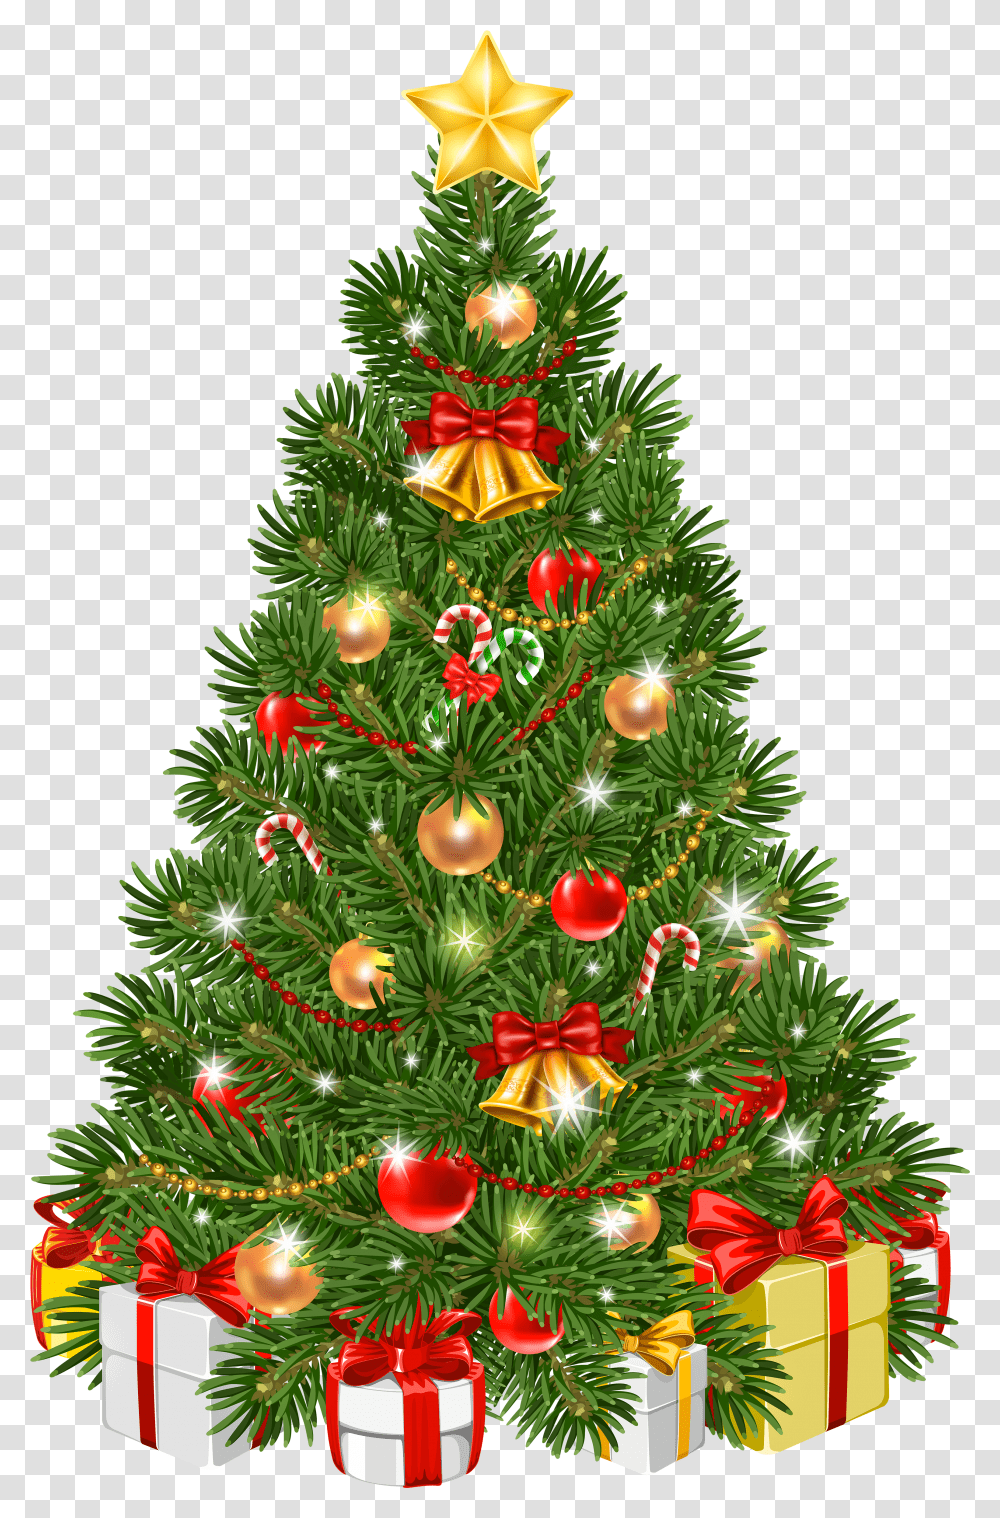 Library Of Decorate Christmas Tree Clip Christmas Tree With Background Transparent Png